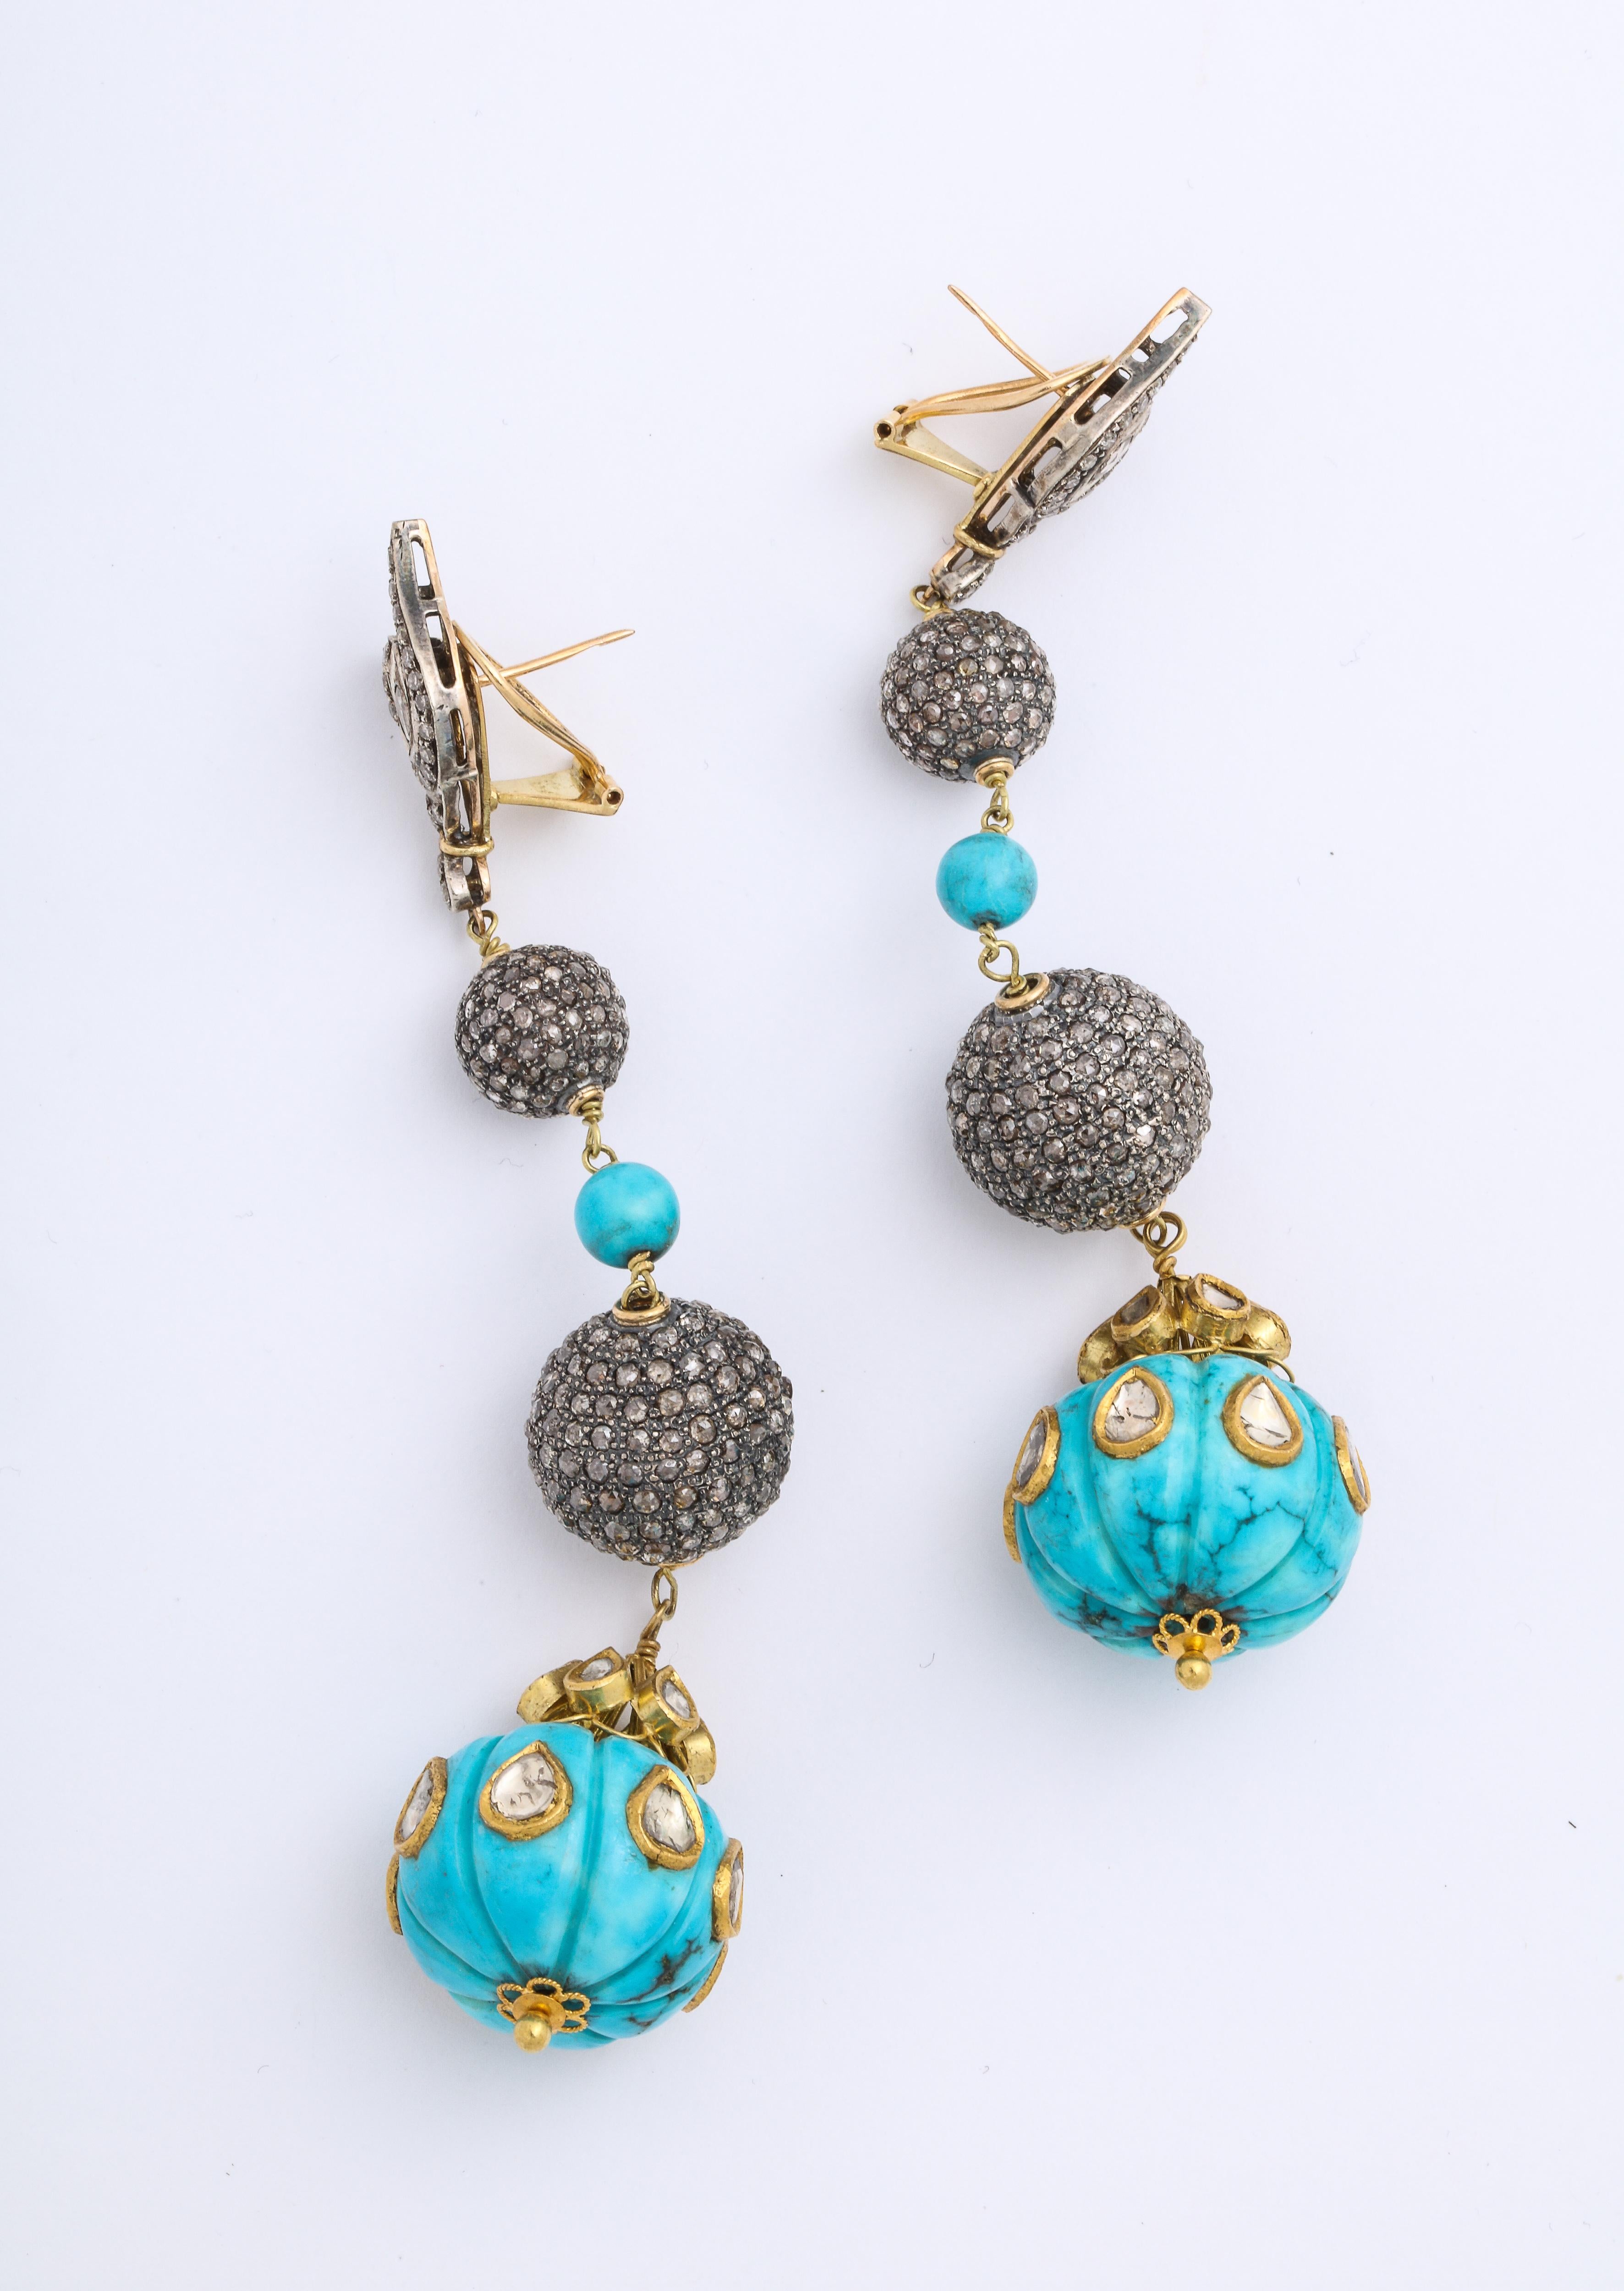 Modern Vintage Estate Drop Turquoise Earrings with Rose Cut Diamonds